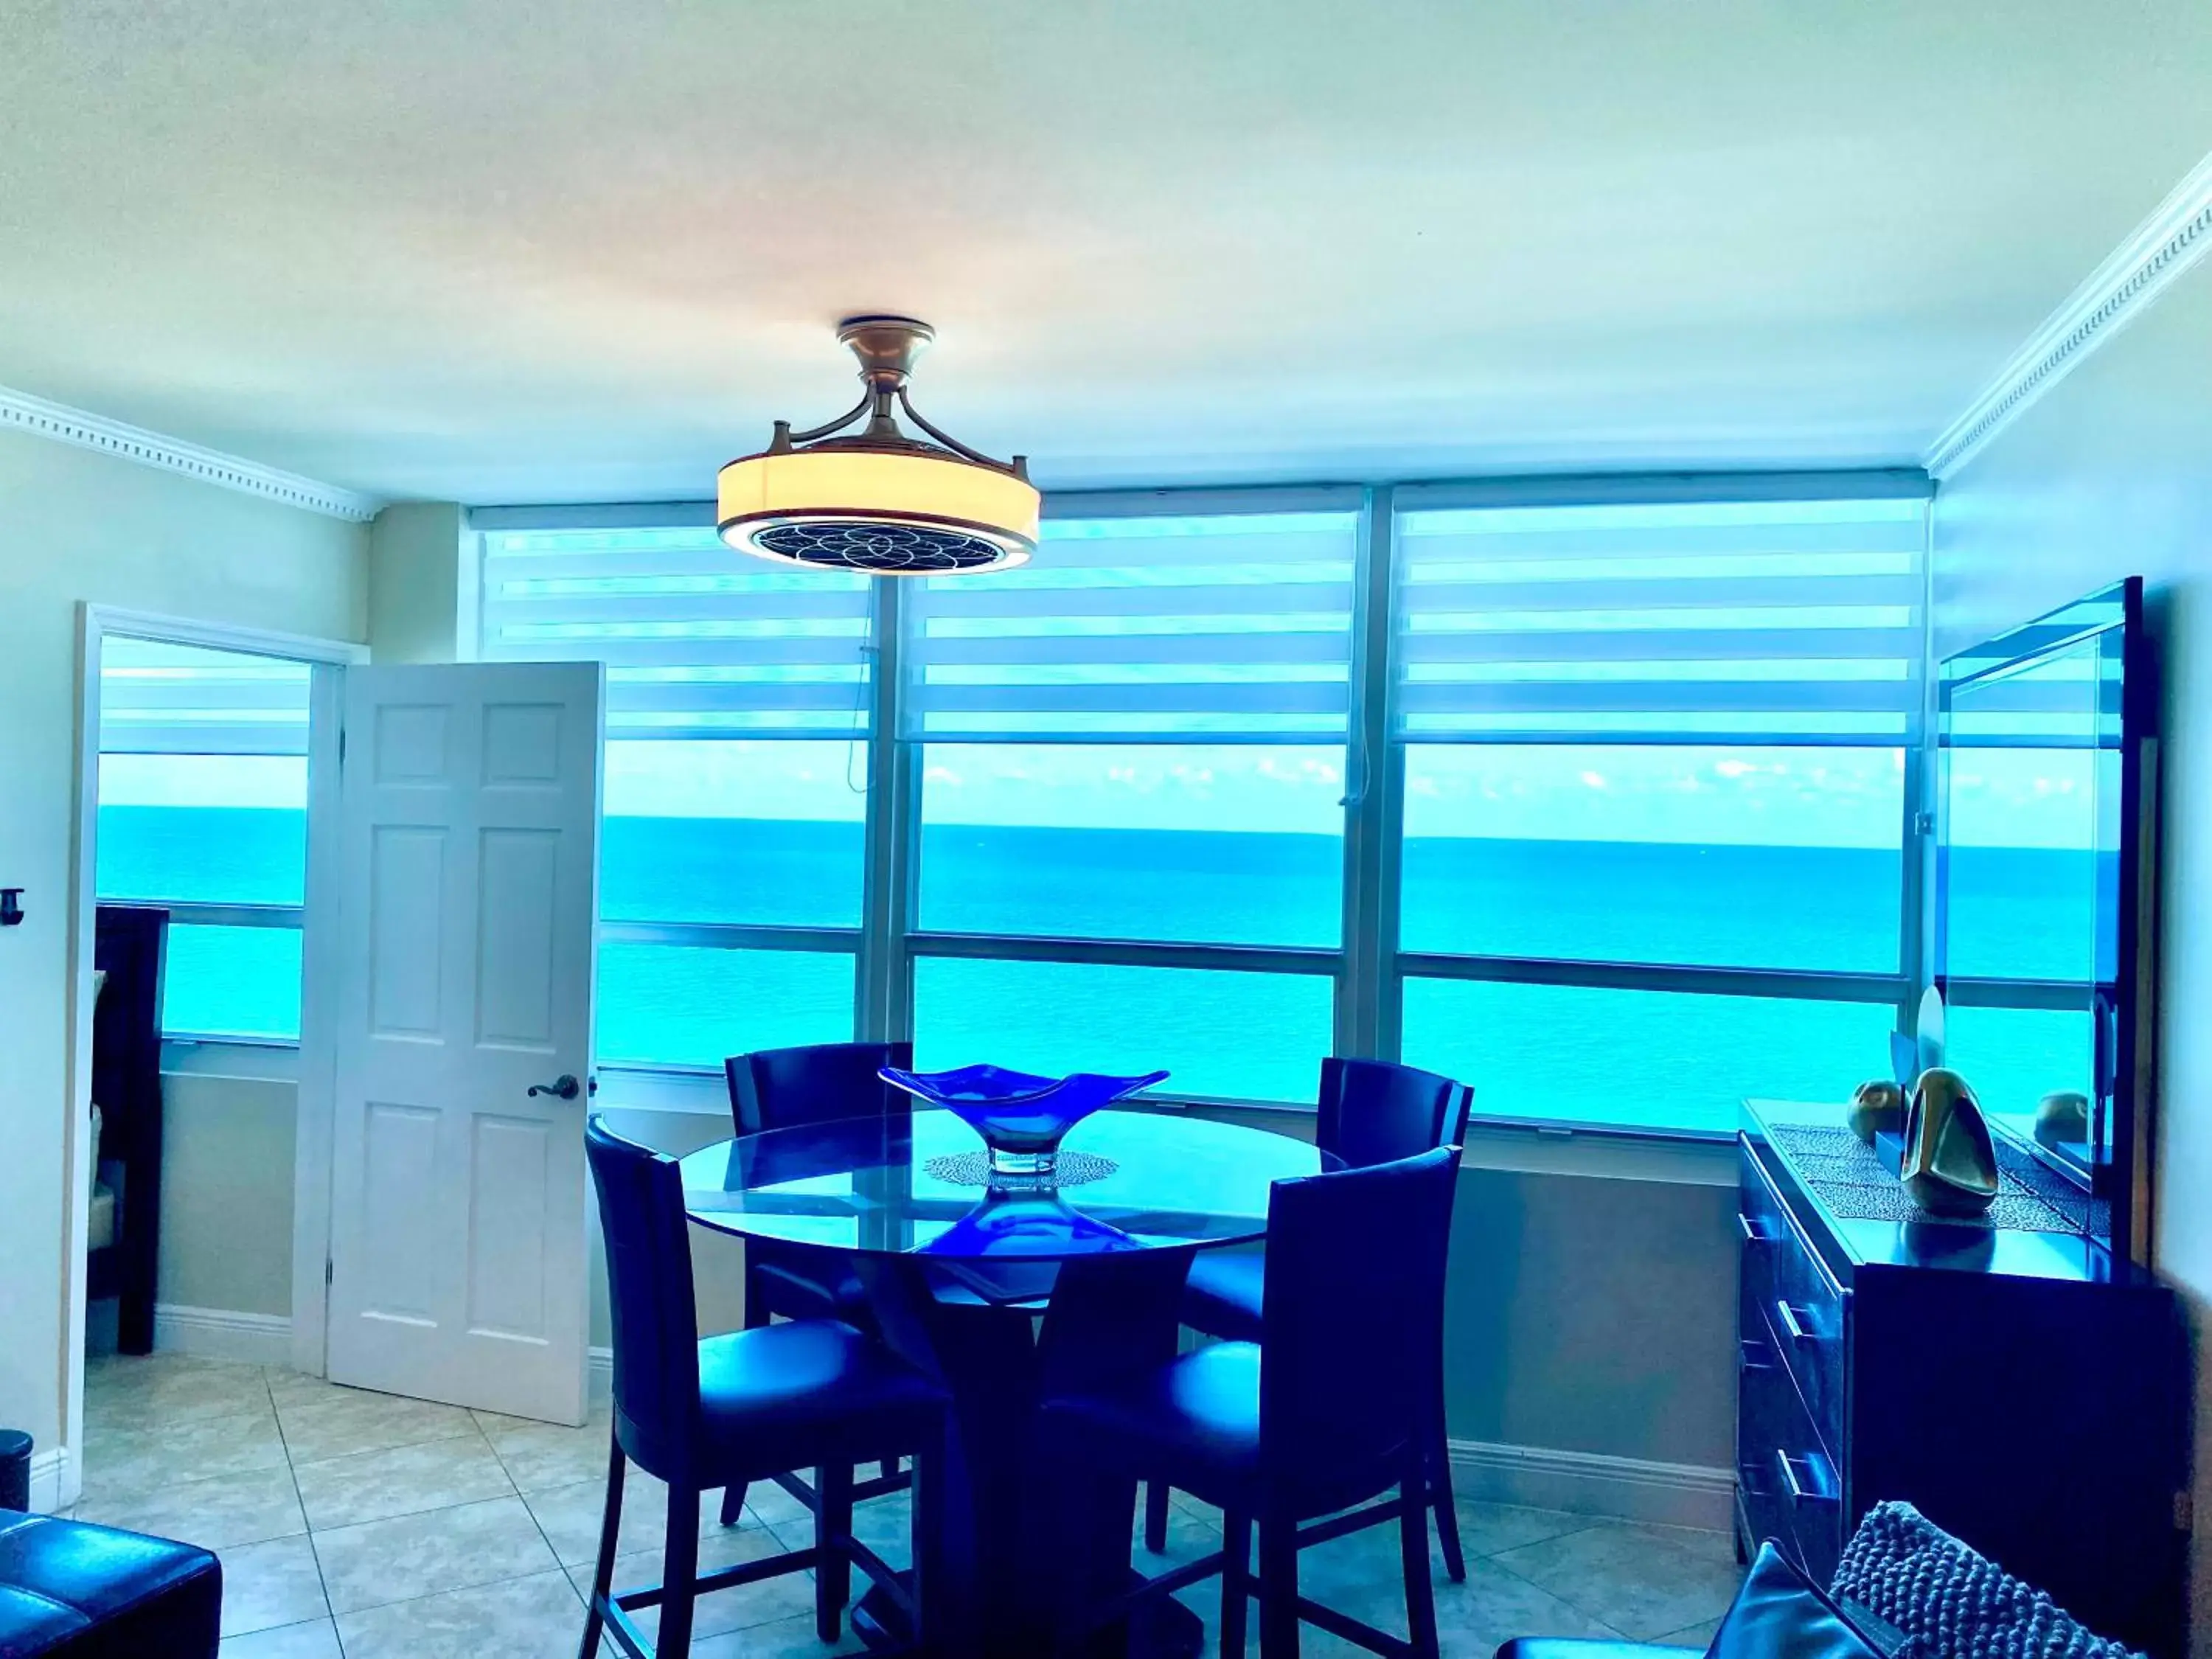 Castle Beach Resort Condo Penthouse or 1BR Direct Ocean View -just remodeled-